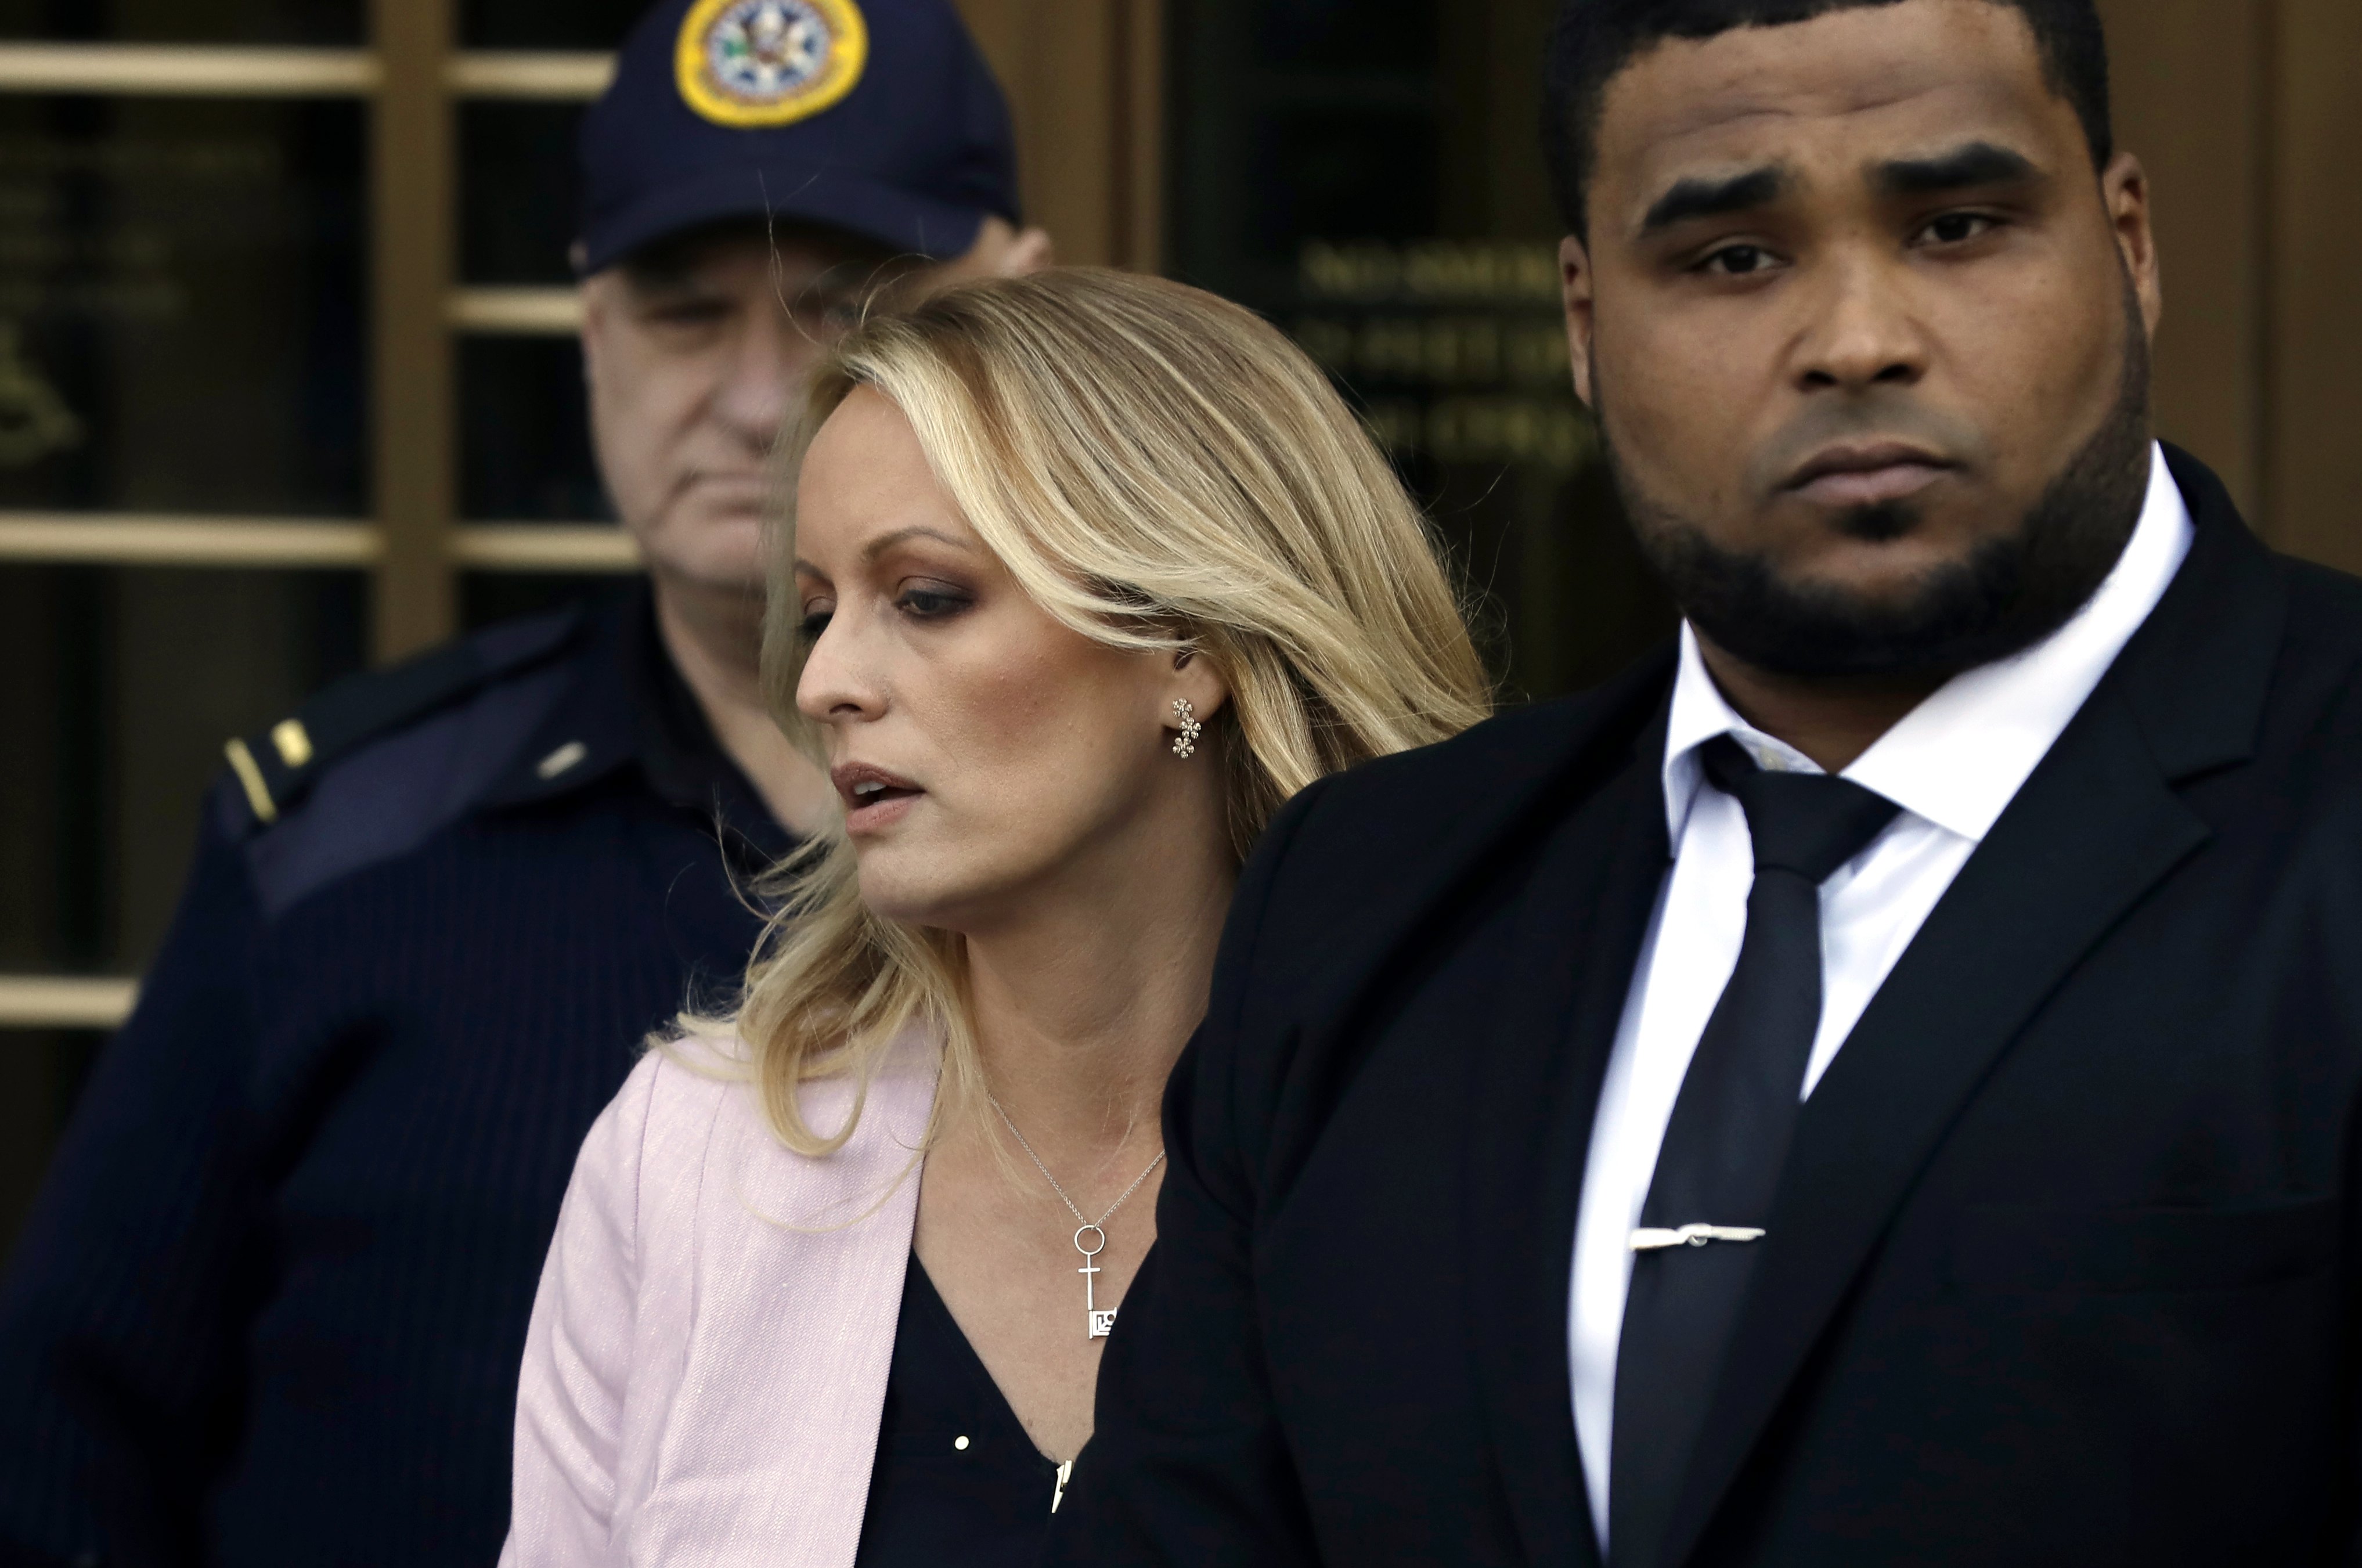 epa06673916 Stormy Daniels (Stephanie Clifford) (C) departs Federal Court after a hearing involving President Donald J. Trump's long-time personal attorney Michael Cohen in New York, New York, USA, 16 April 2018. Cohen's hotel room, apartment and office were raided last week by federal authorities reportedly as part of an investigation into possible bank fraud, wire fraud and campaign finance violations.  EPA/PETER FOLEY